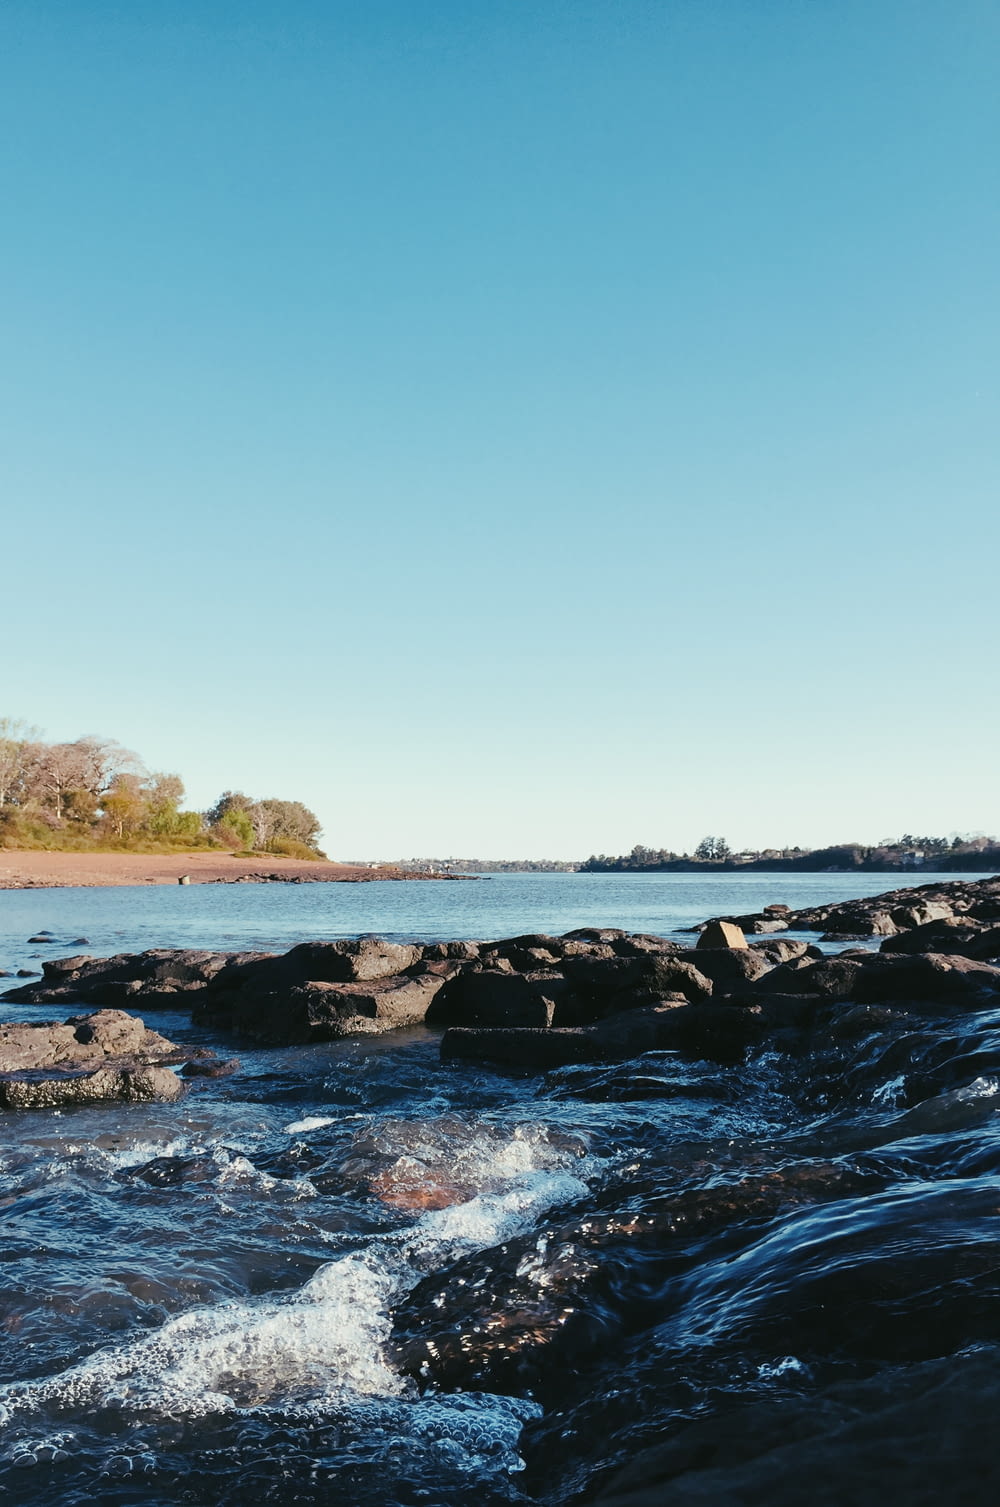 rocky shore with rocks and trees under blue sky during daytime